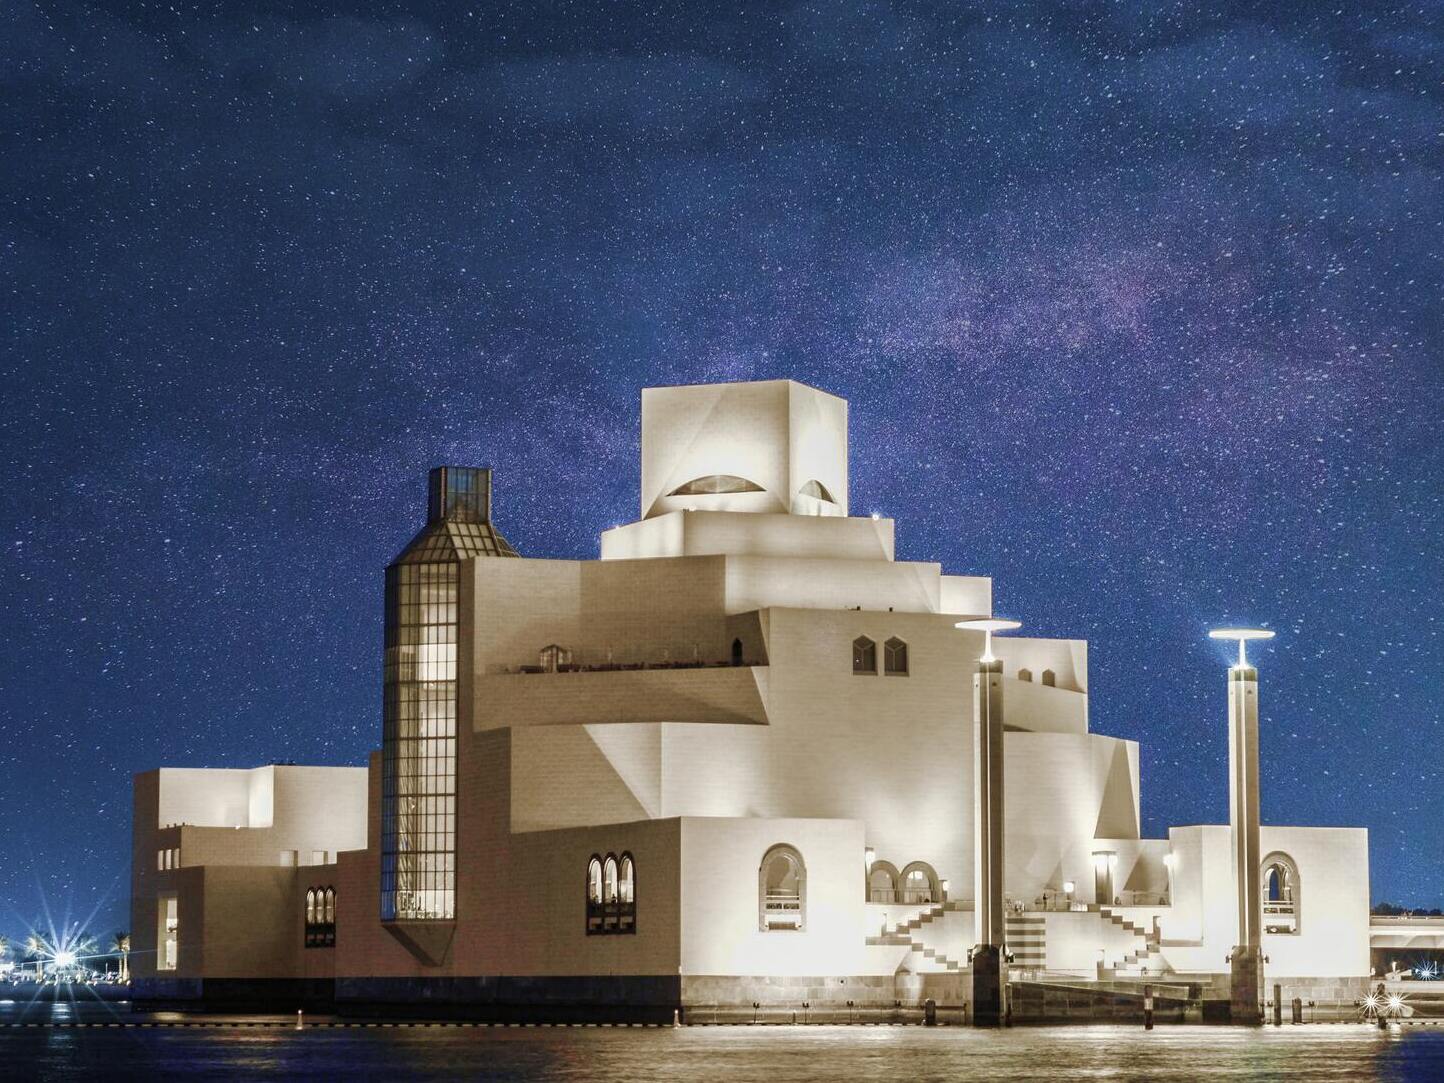 visit the museum of islamic art in diha qatar during doha world cup 2022